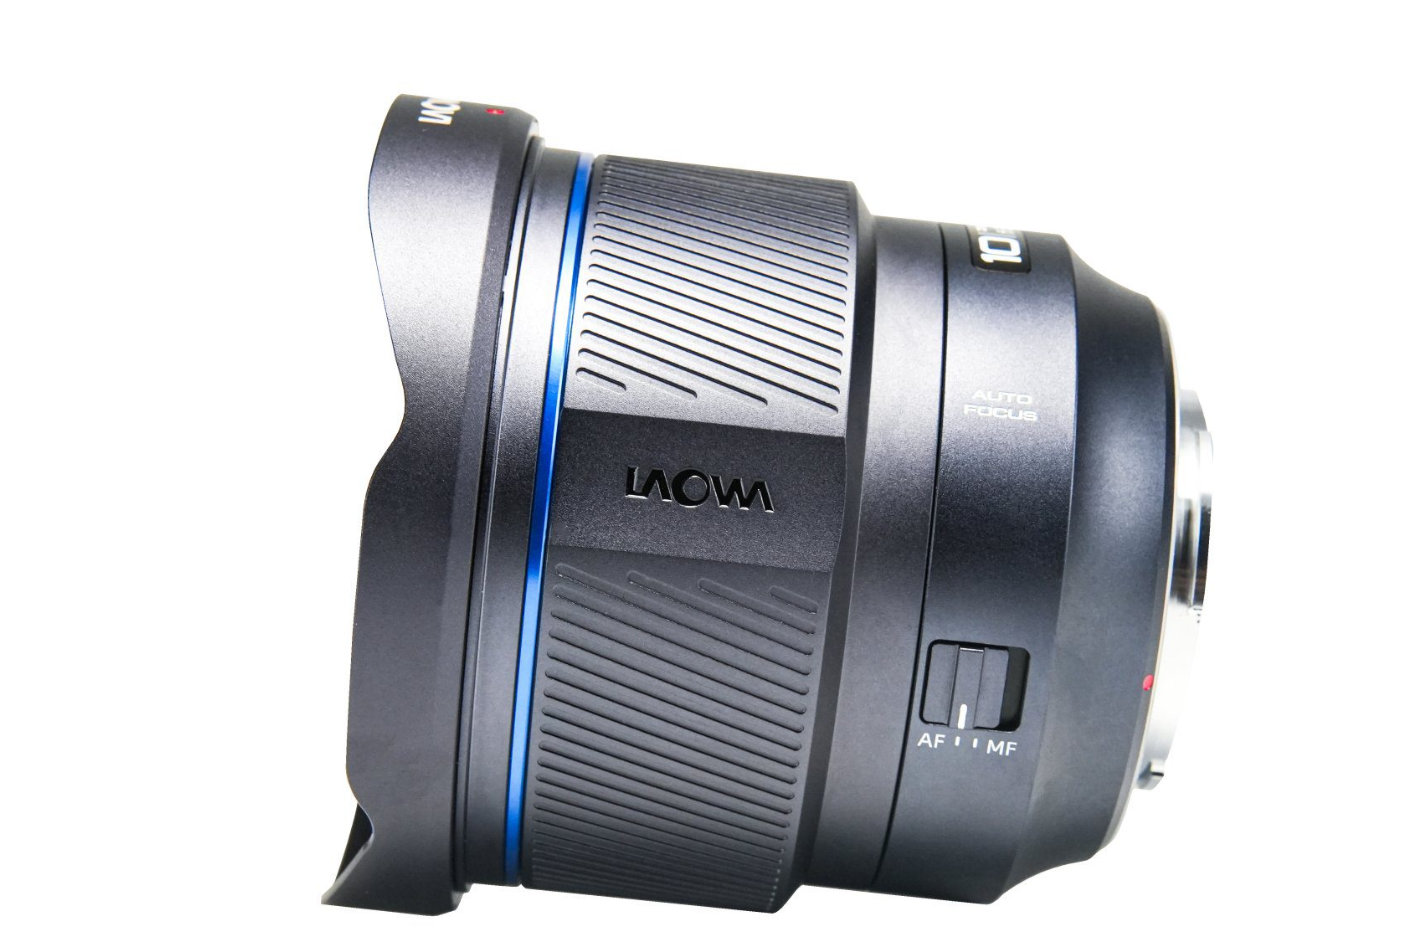 Laowa 10mm f/2.8 Zero-D FF: another world’s first!